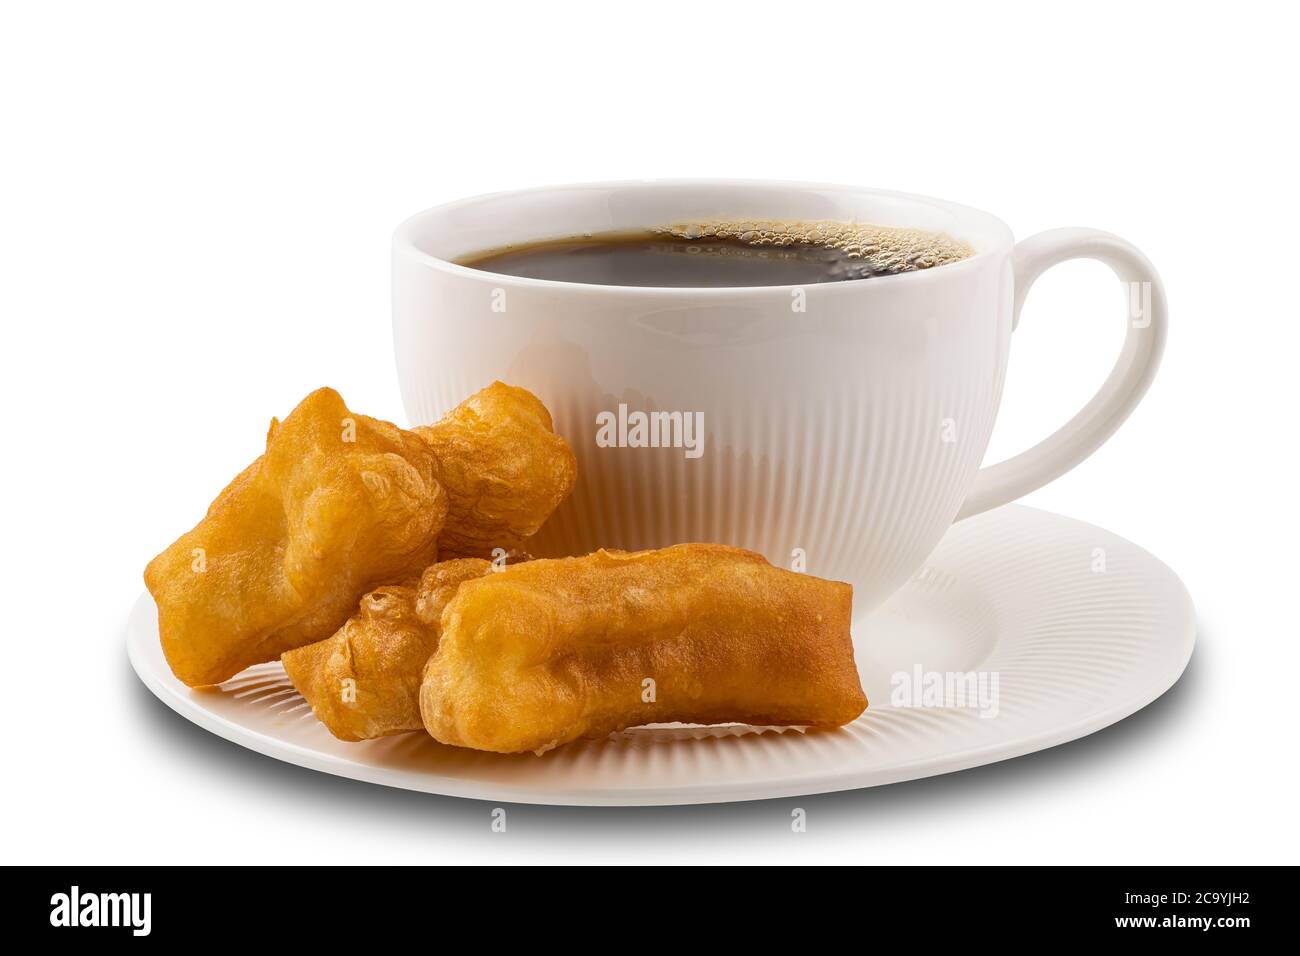 Deep-fried dough stick and a cup of hot black coffee in a white ceramic plate on white background with clipping path. Stock Photo